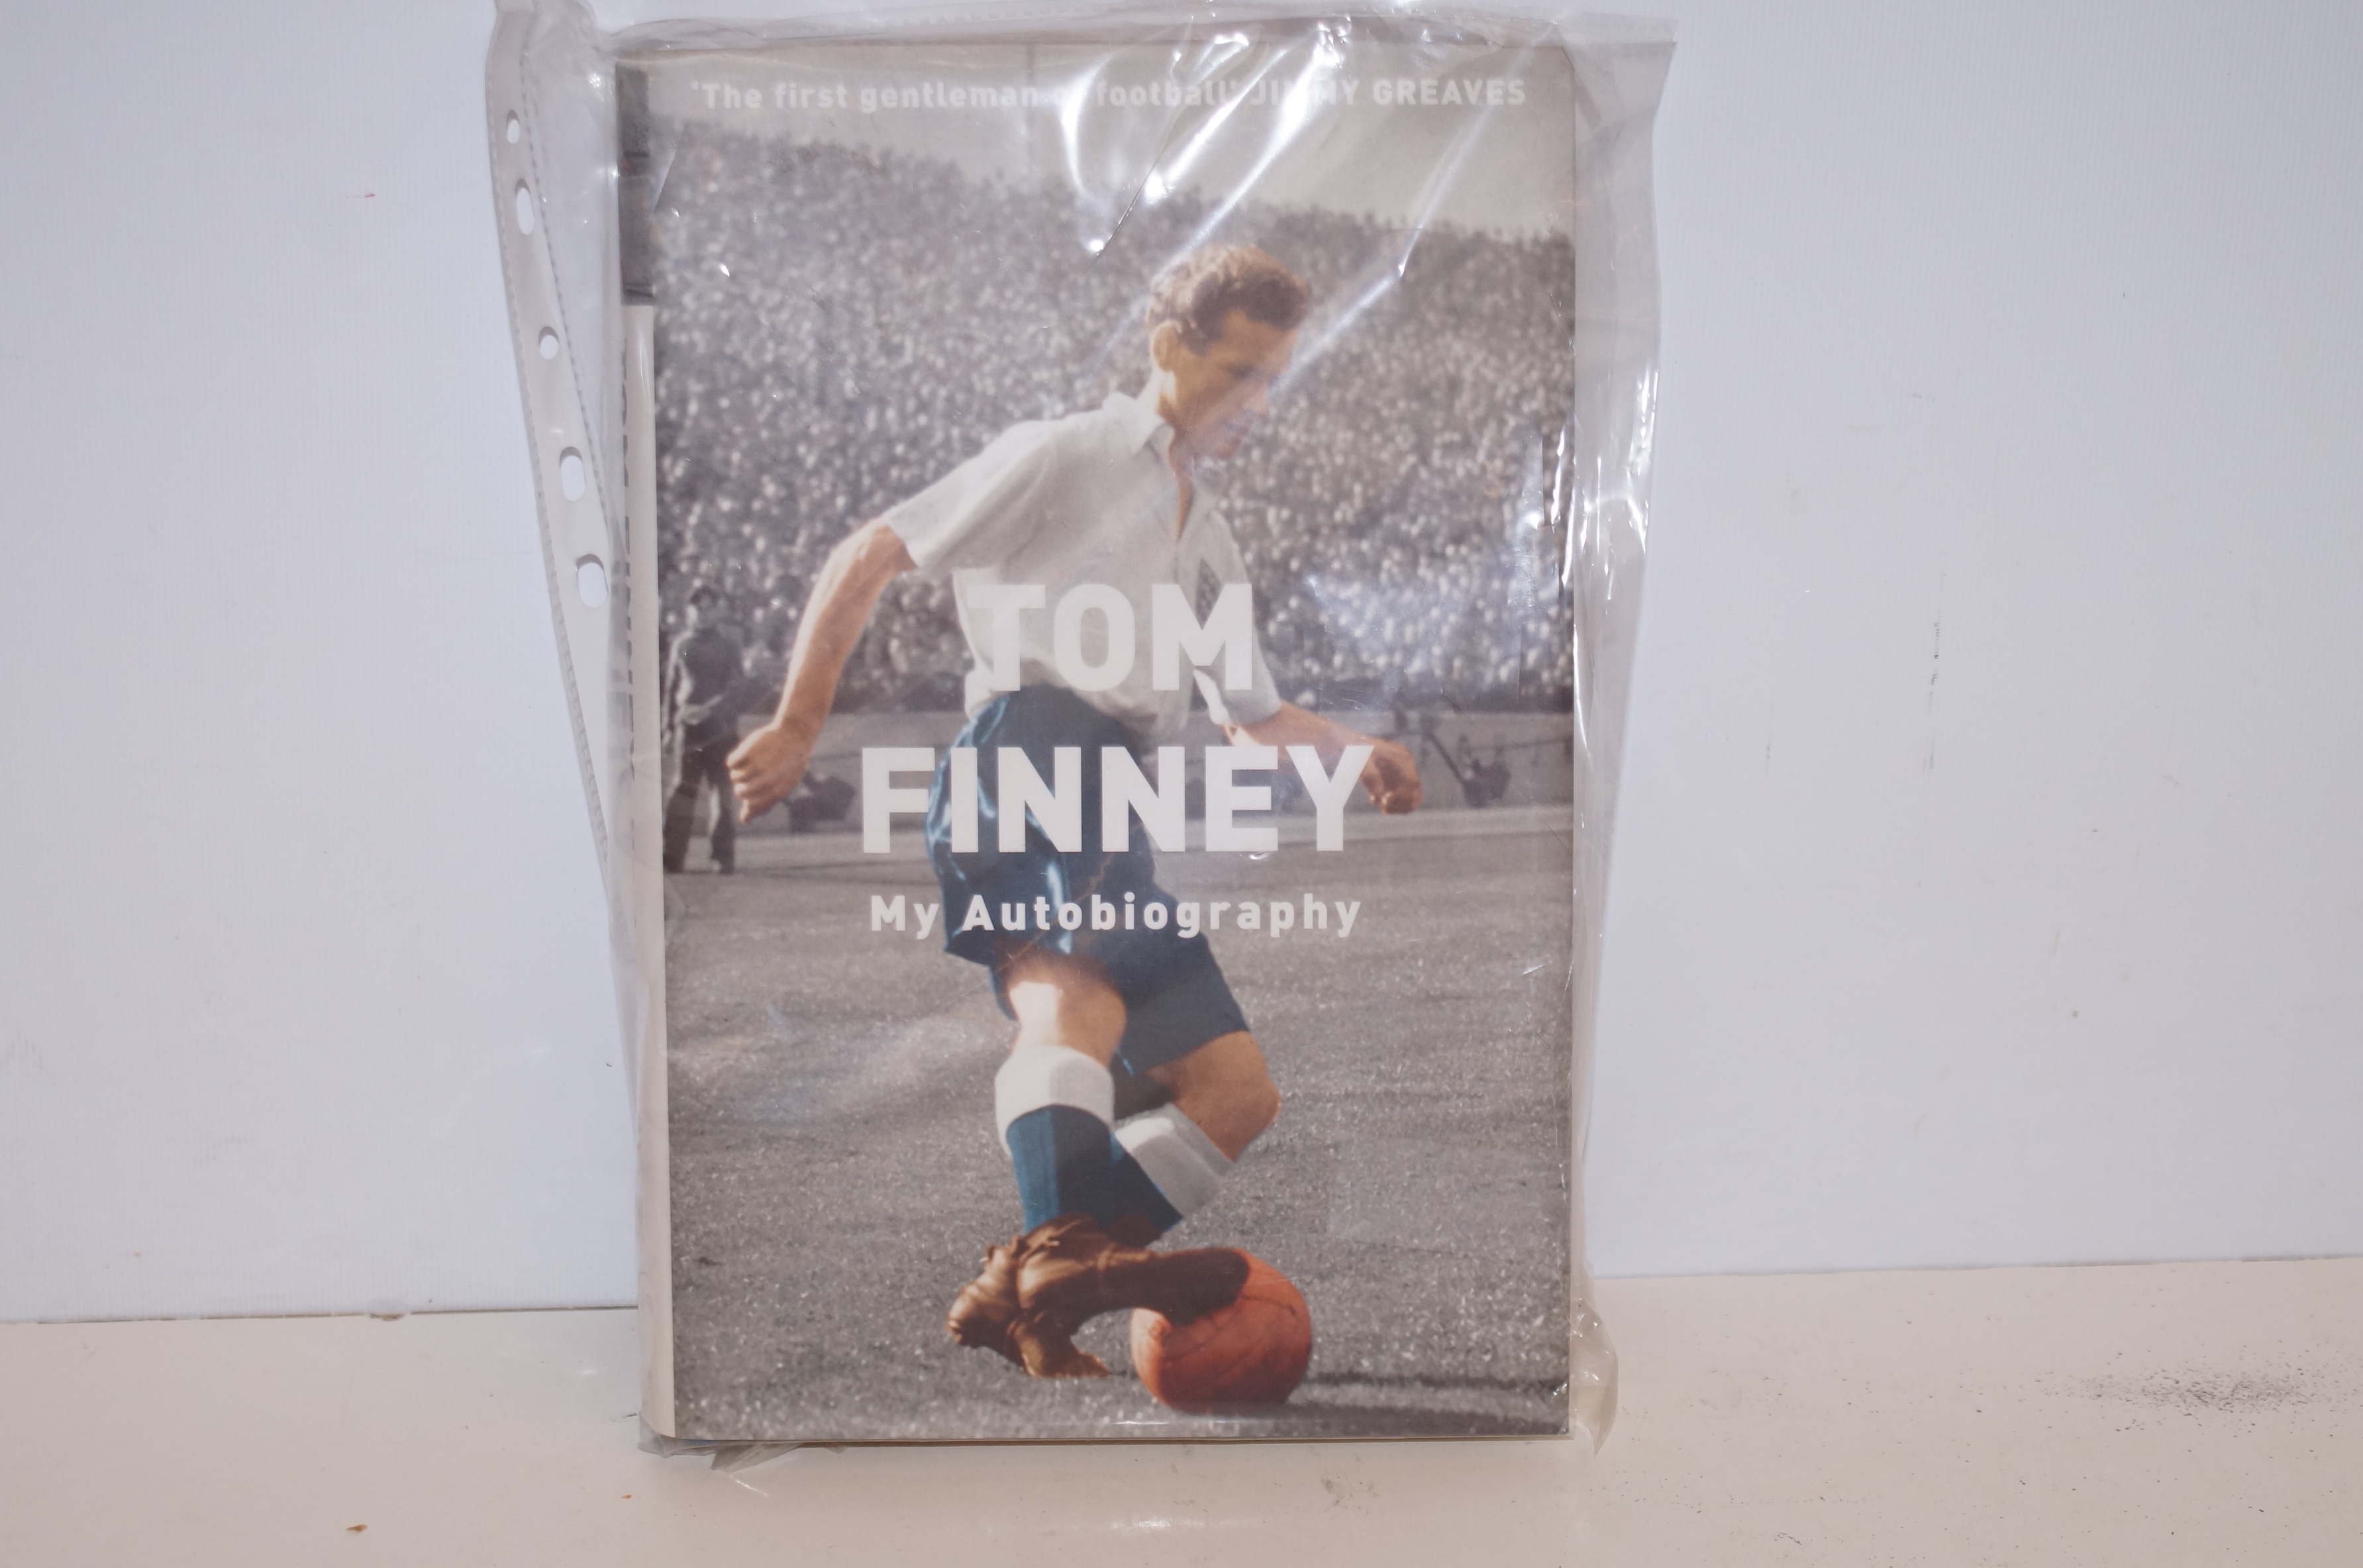 Tom Finney My autobiography signed copy